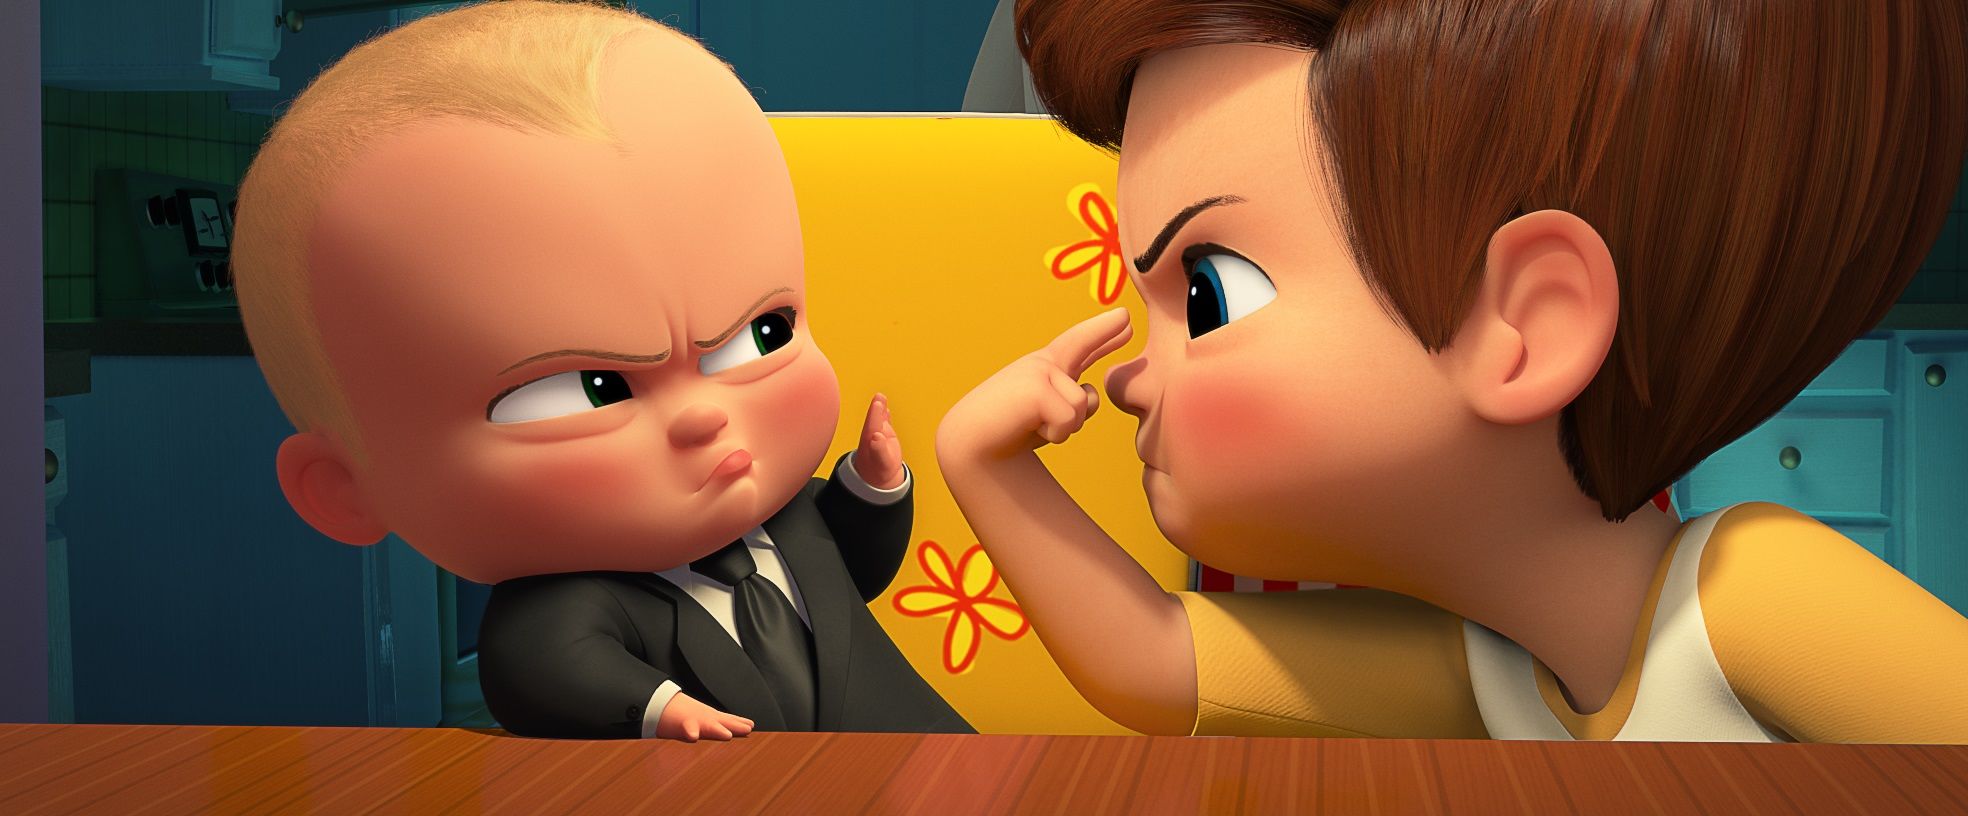 The Boss Baby' comes to PH cinemas on April 15